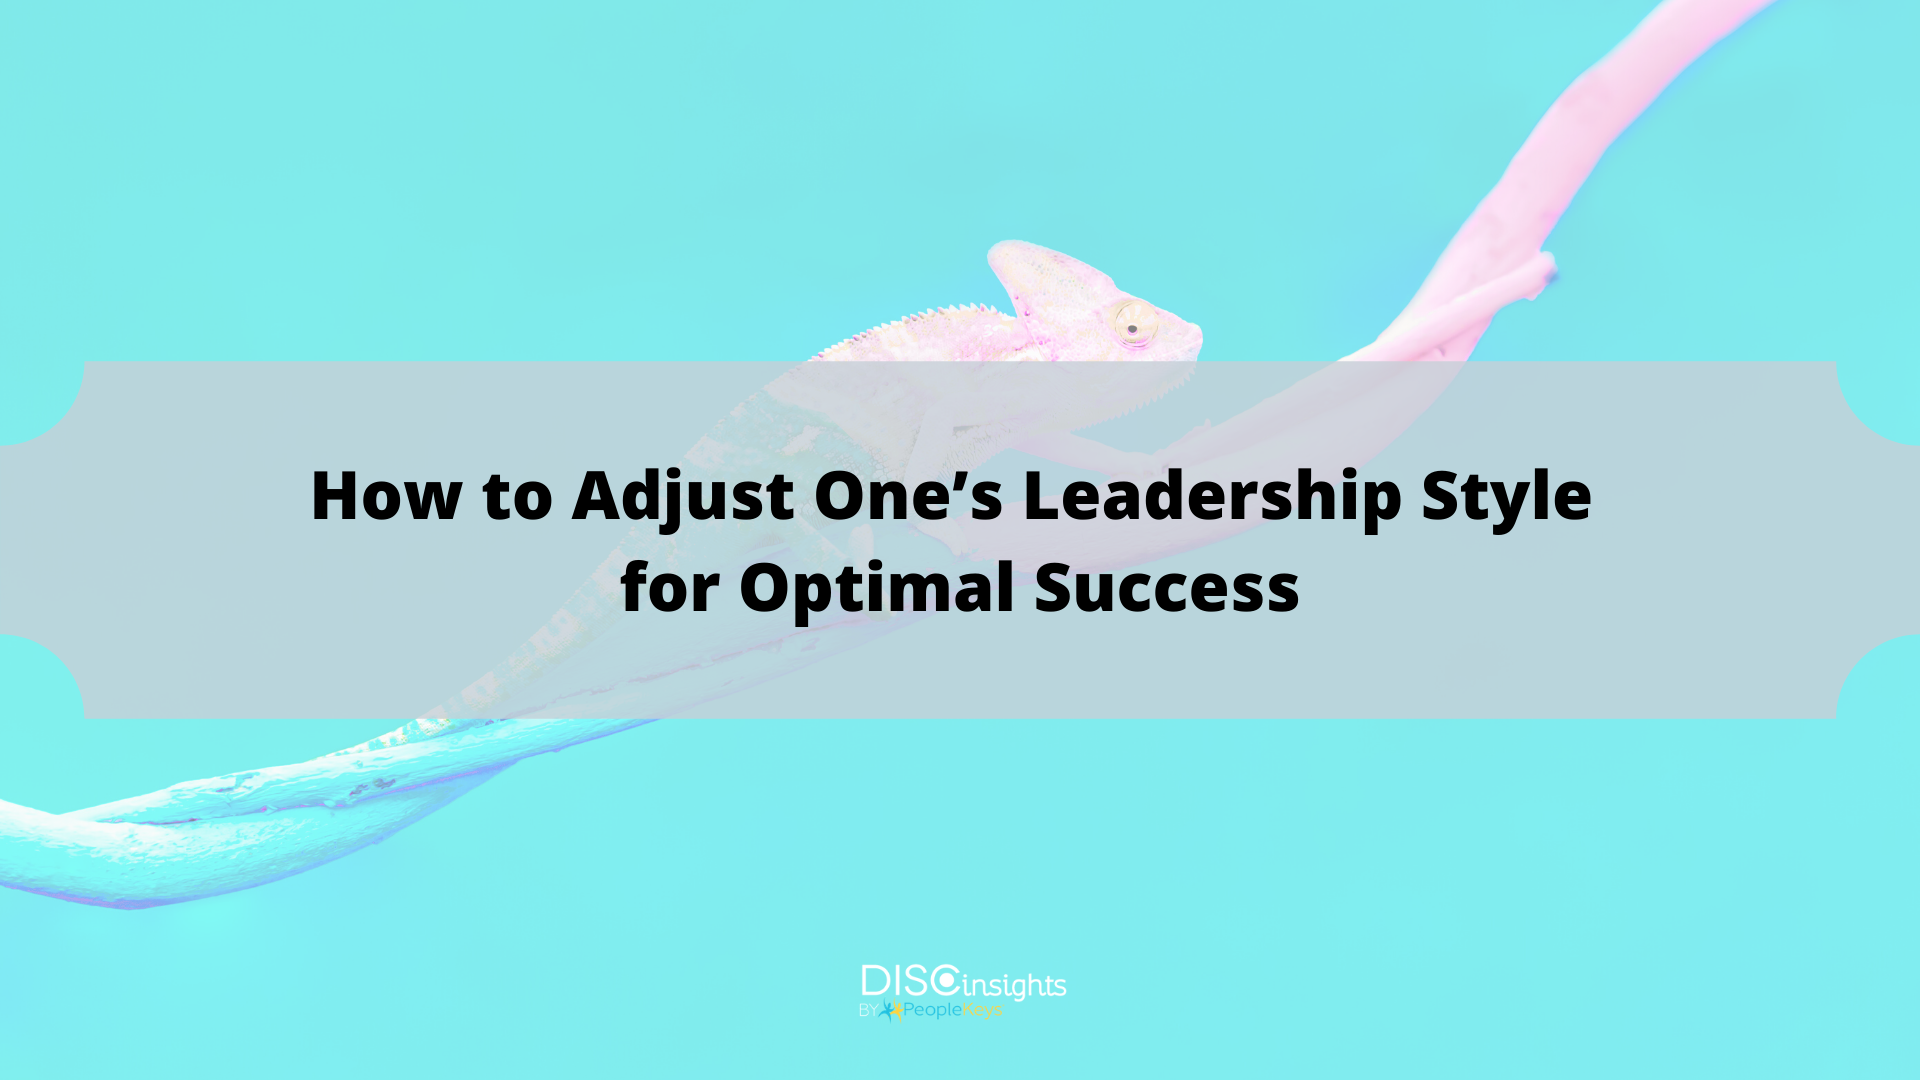 How to Adjust One’s Leadership Style for Optimal Success